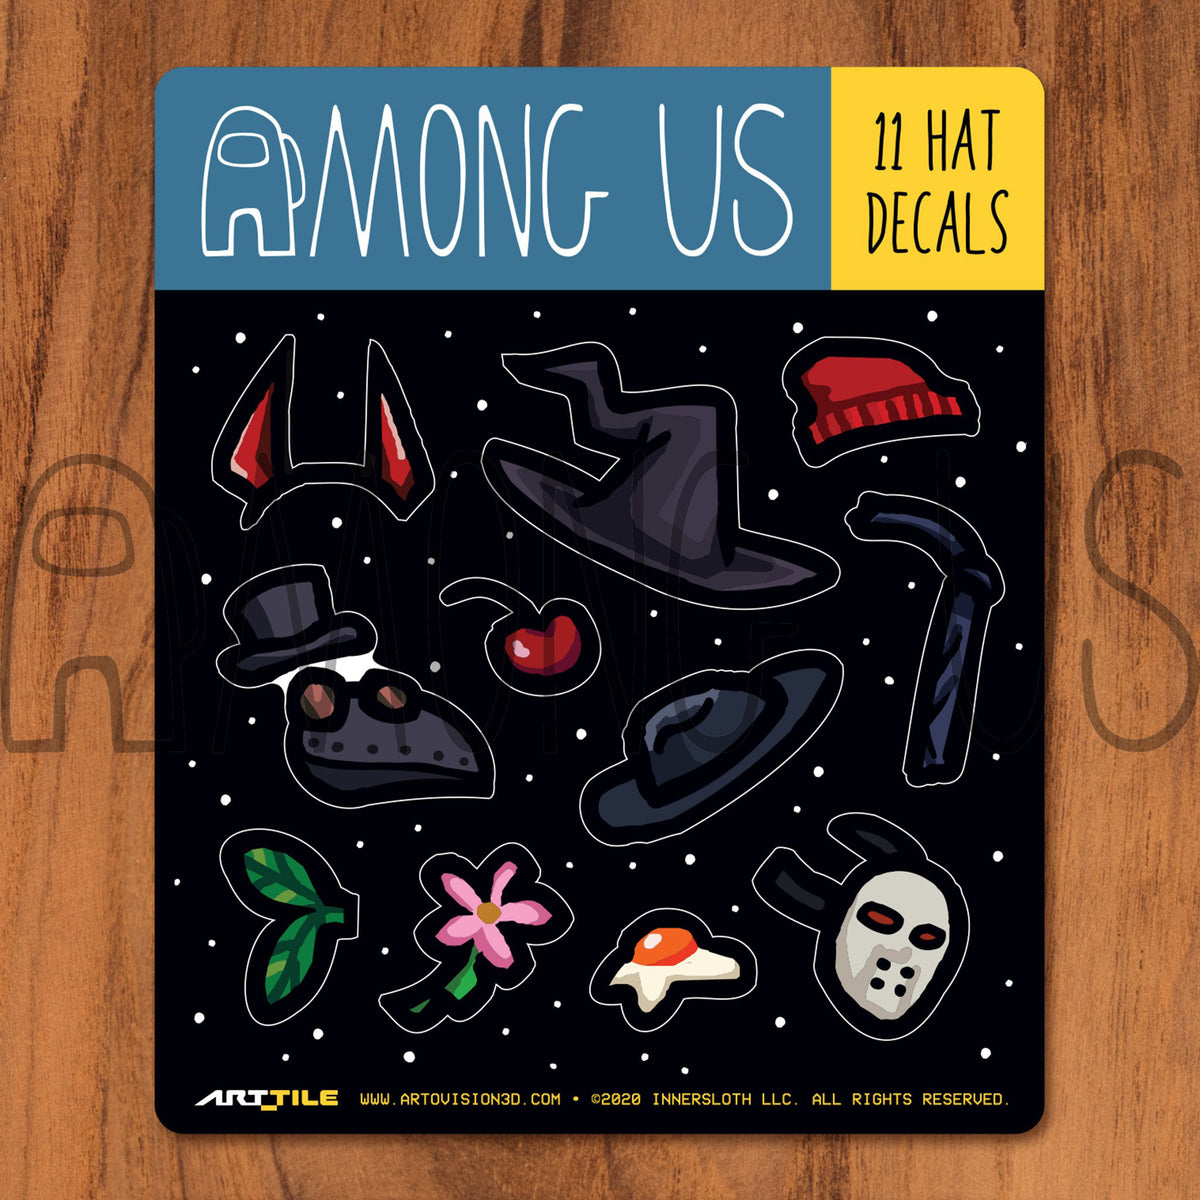 A product photograph of the hat decals that are part of the Among Us: Crewmate Art Tile Decals by Artovision3D. There are 11 hat options on the sheet: Imp-ressive horns, red beanie, cherry, egg, hockey mask, Daisy Me Rollin’ pink flower, black fedora, black bandana, black witch hat, and plague mask with tophat.